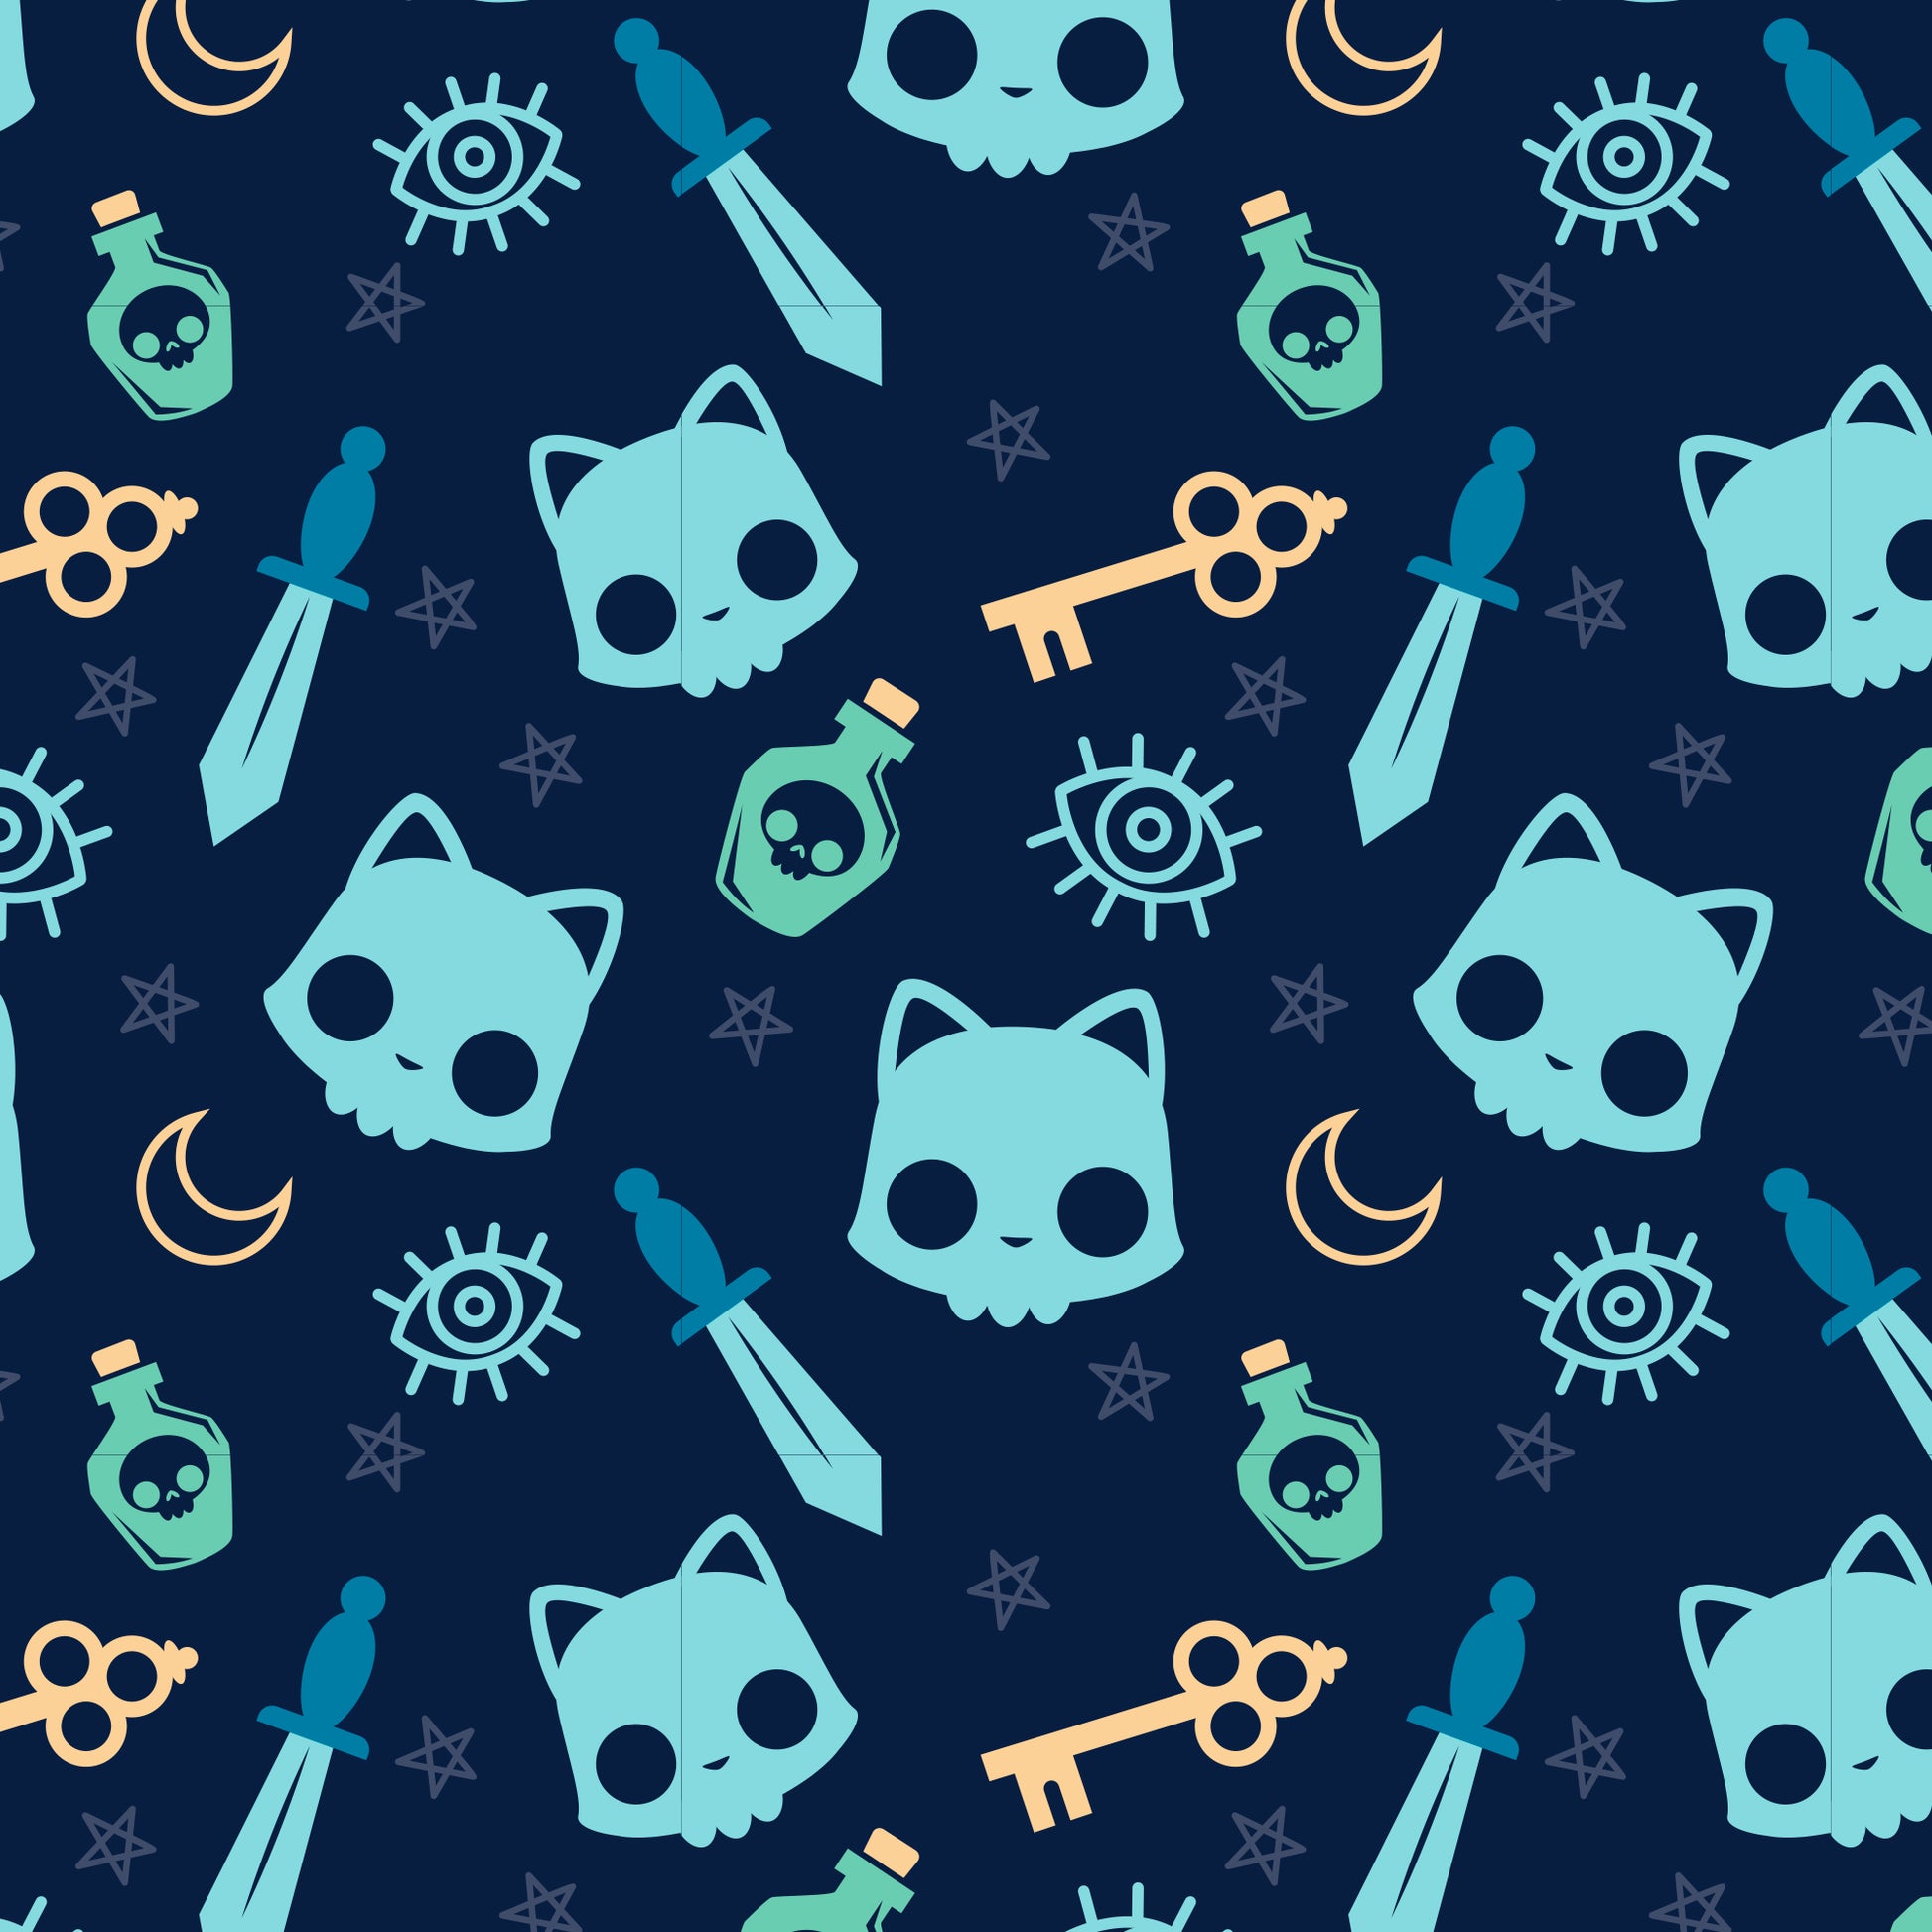 A Plushiverse Skeleton Cat Plushie Tote Bag with a cat, moon and stars pattern, perfect for TeeTurtle plushies enthusiasts.